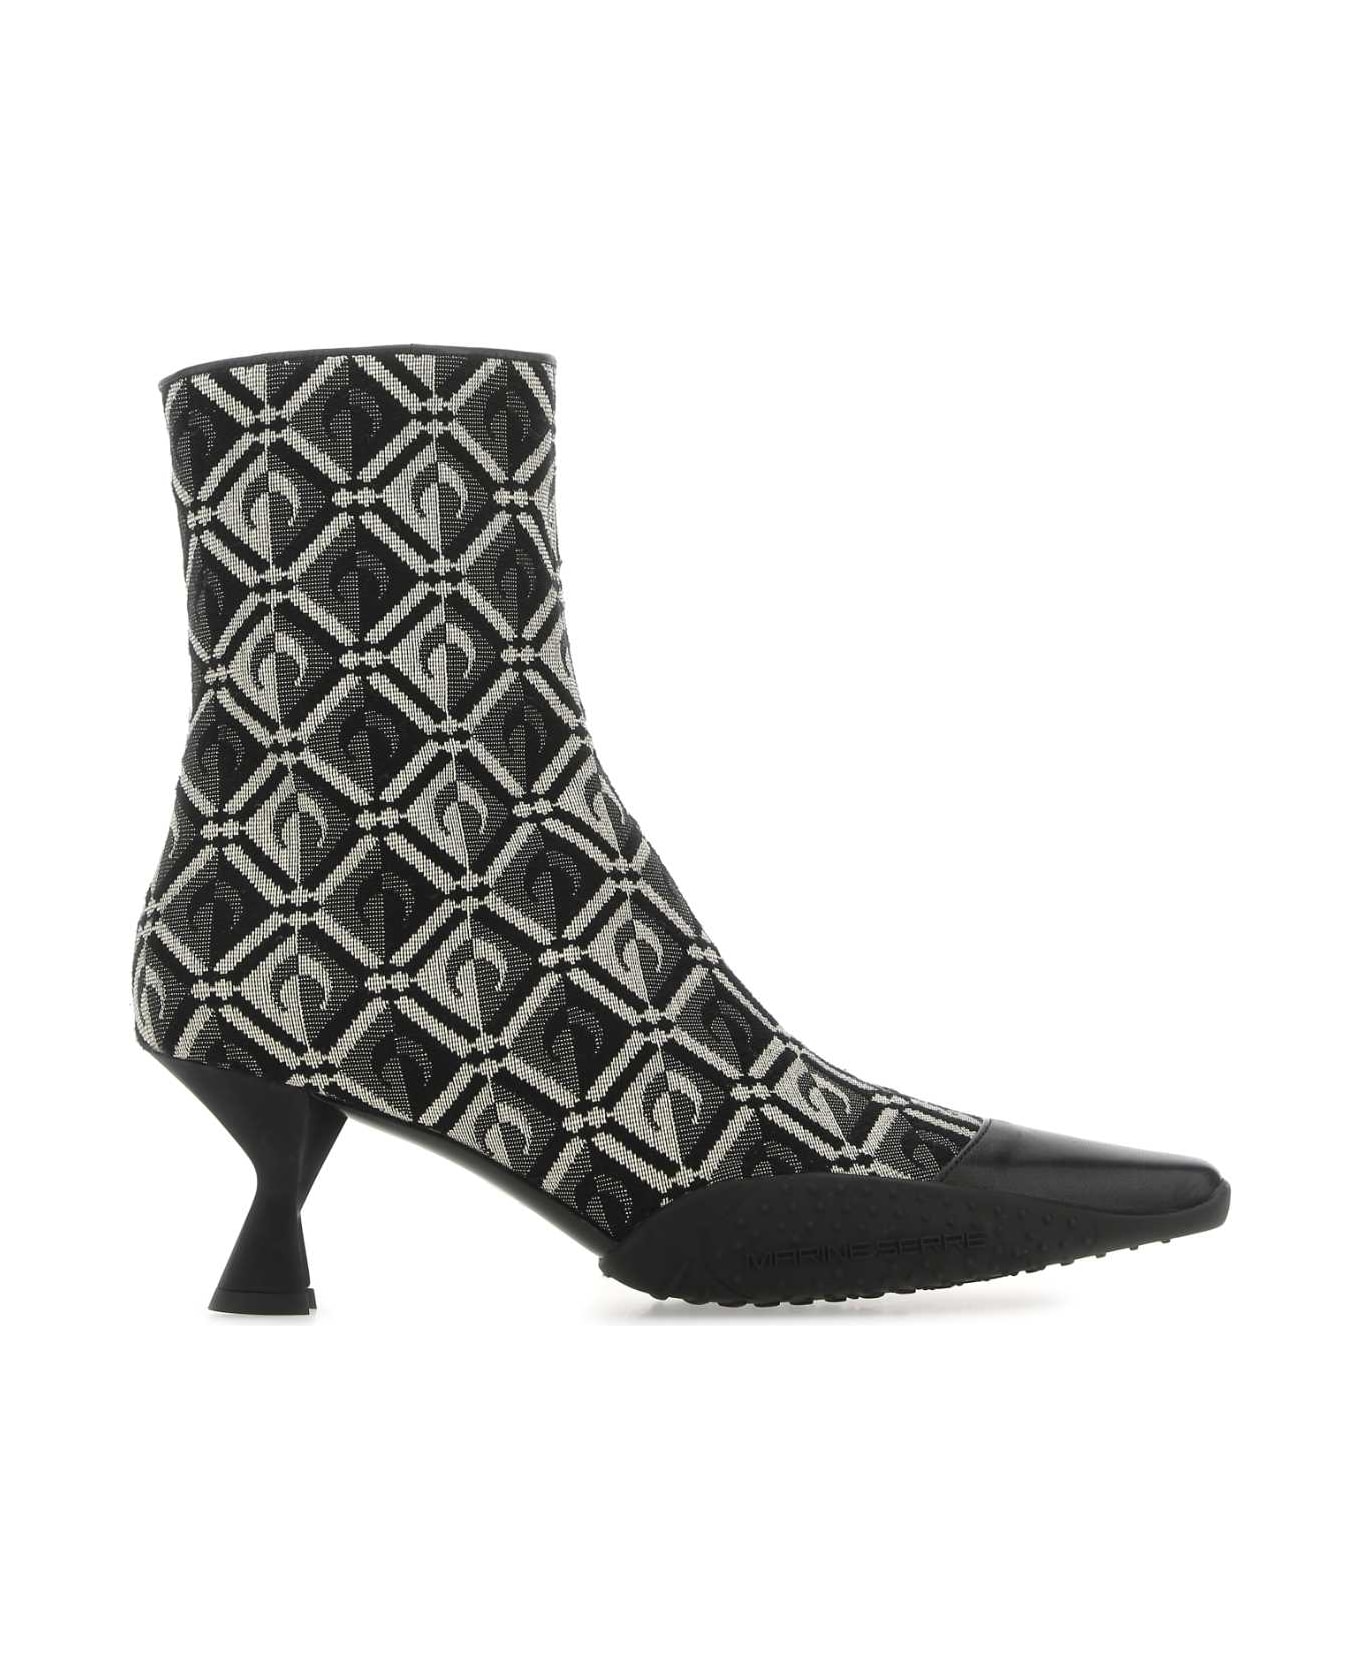 Marine Serre Embroidered Cotton Blend Moon Diamant Ankle Boots - 00 ブーツ